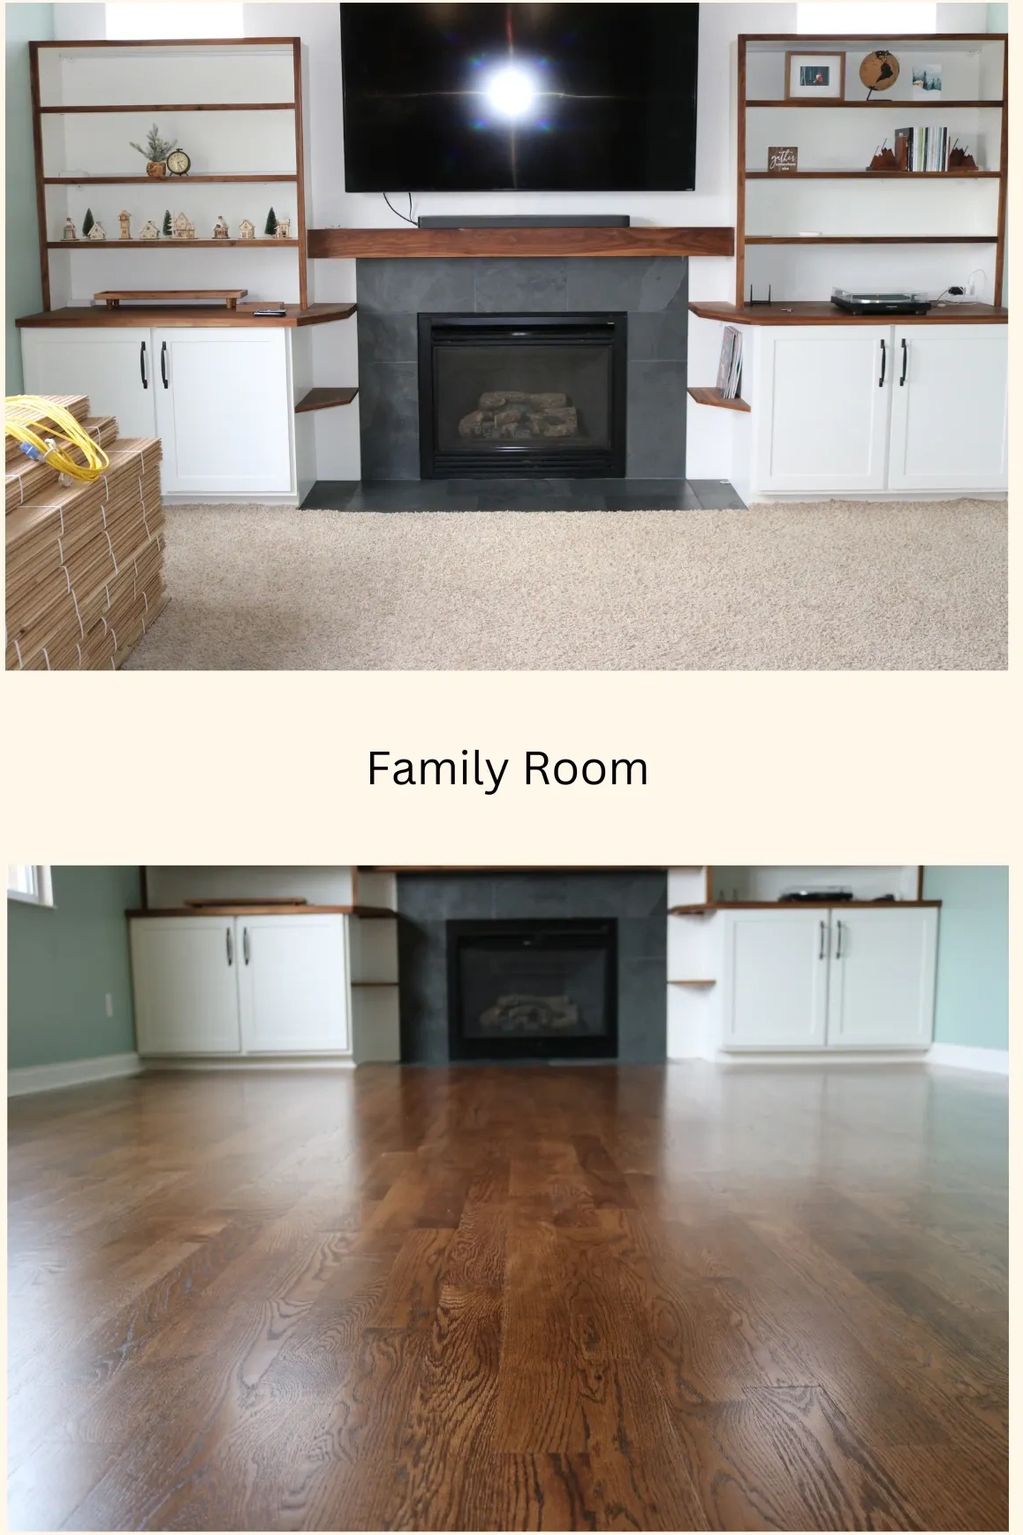 Carpet Removal And Hardwood Floor Installation: Transform Your Space!